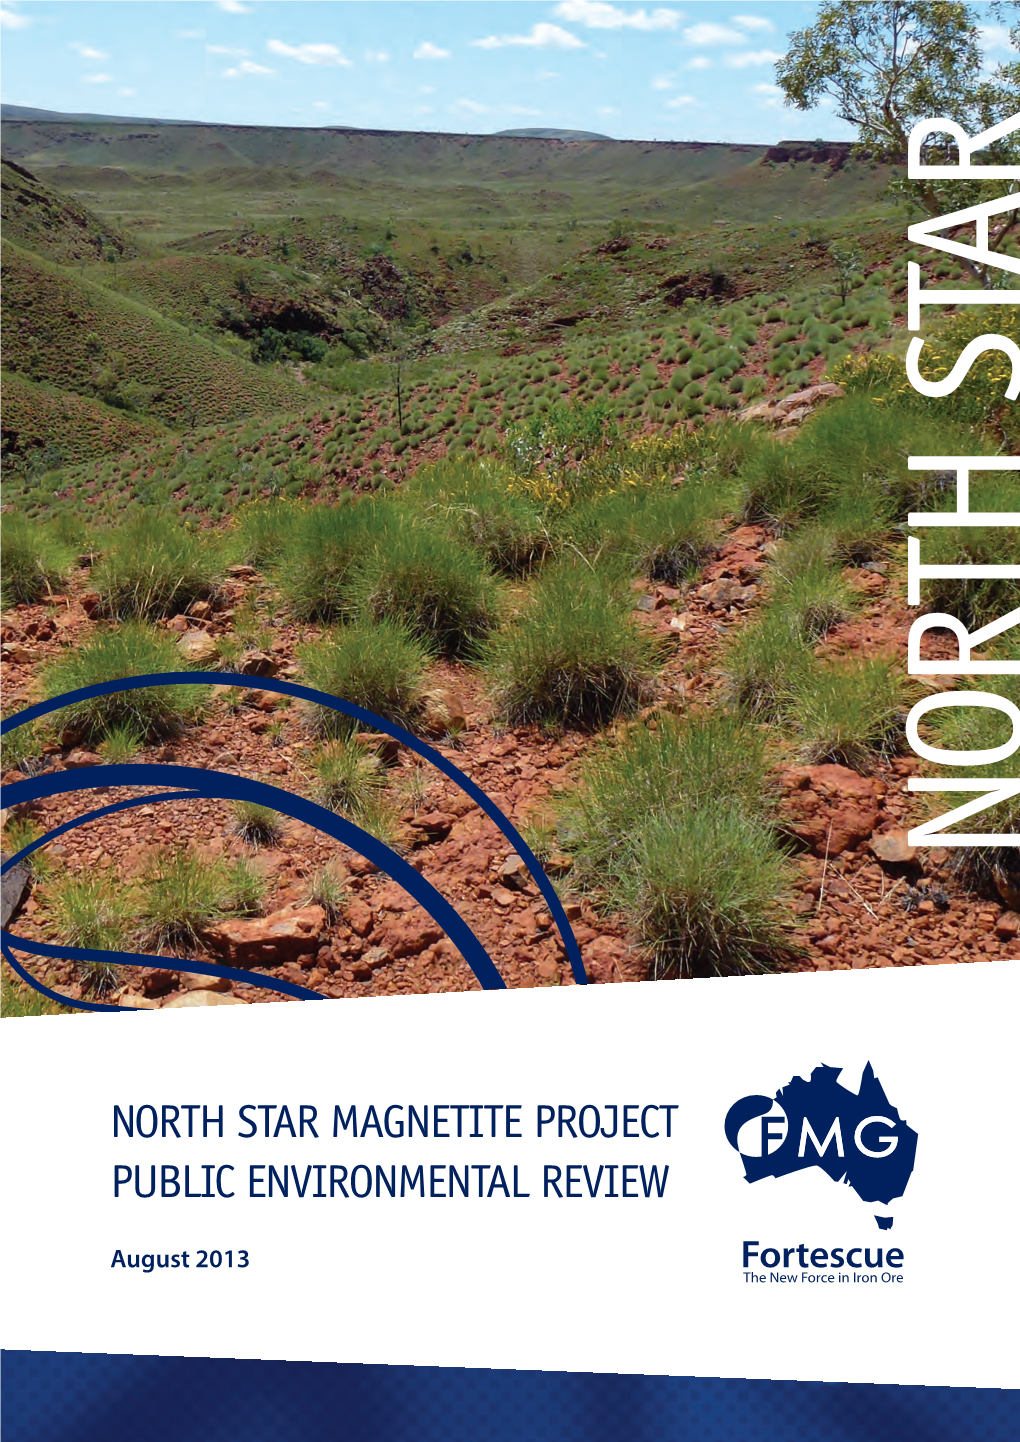 North Star Magnetite Project Public Environmental Review